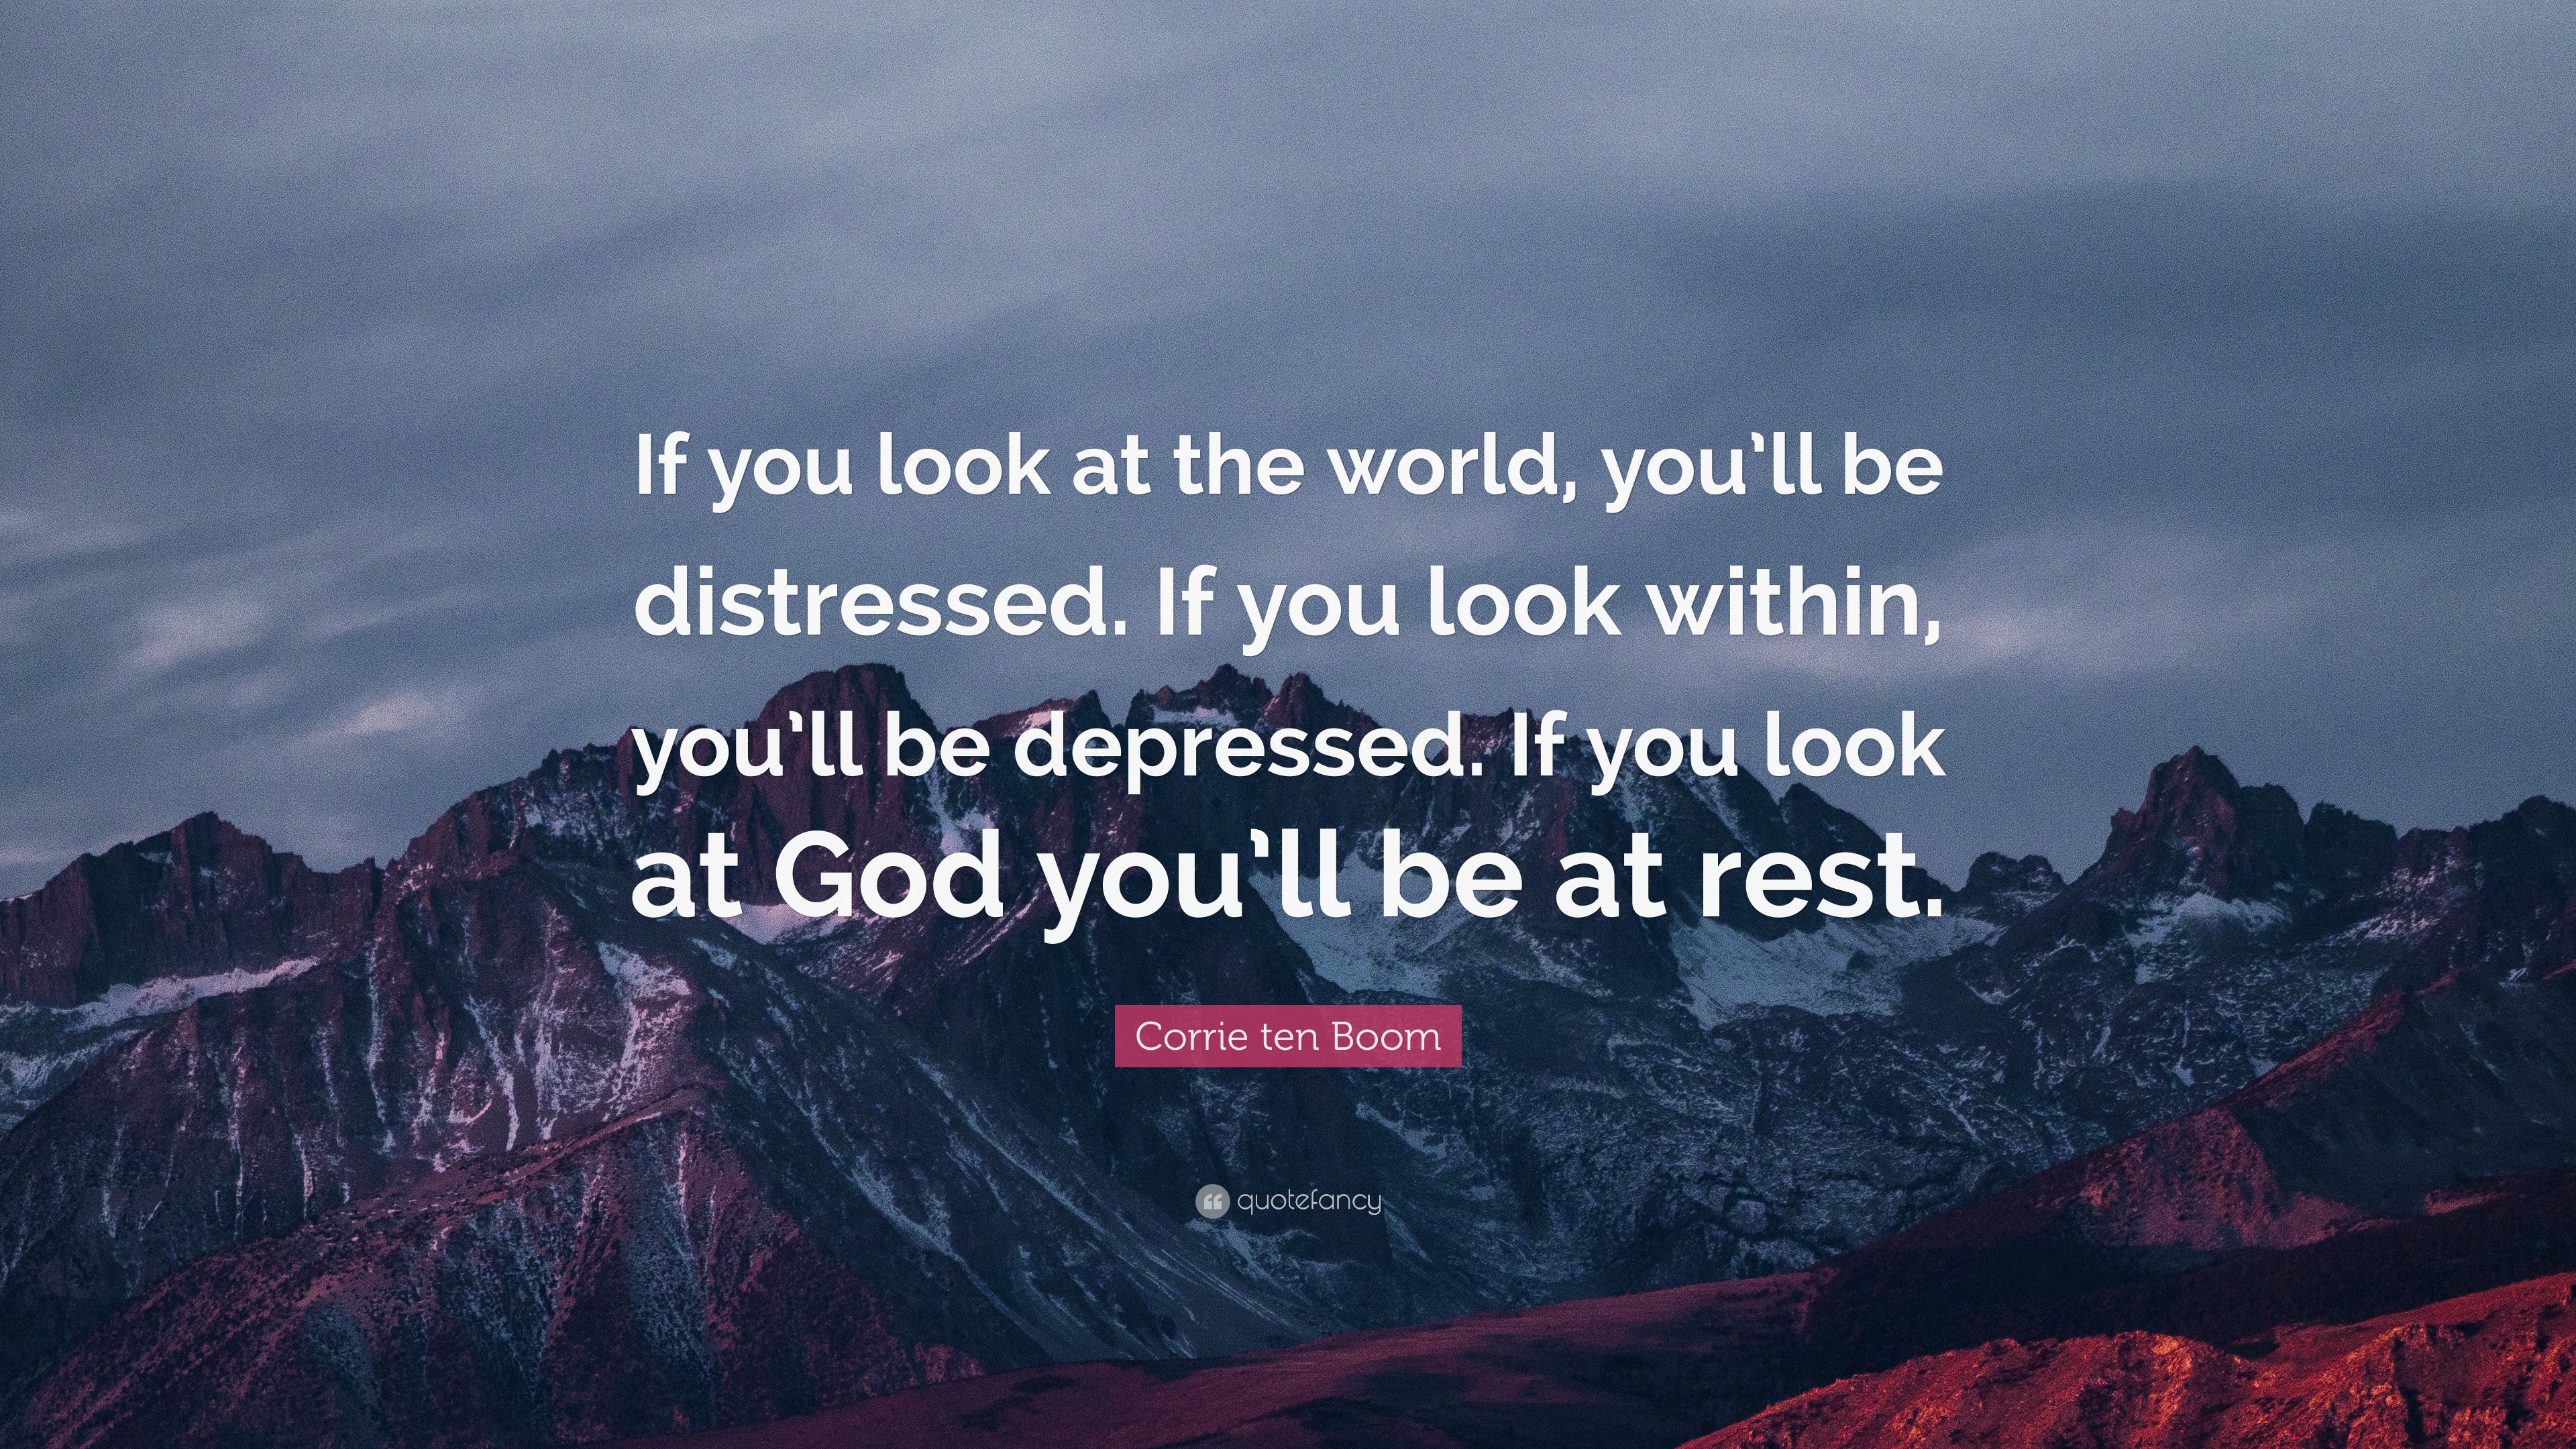 Corrie ten Boom Quote “If you look at the world, you’ll be distressed